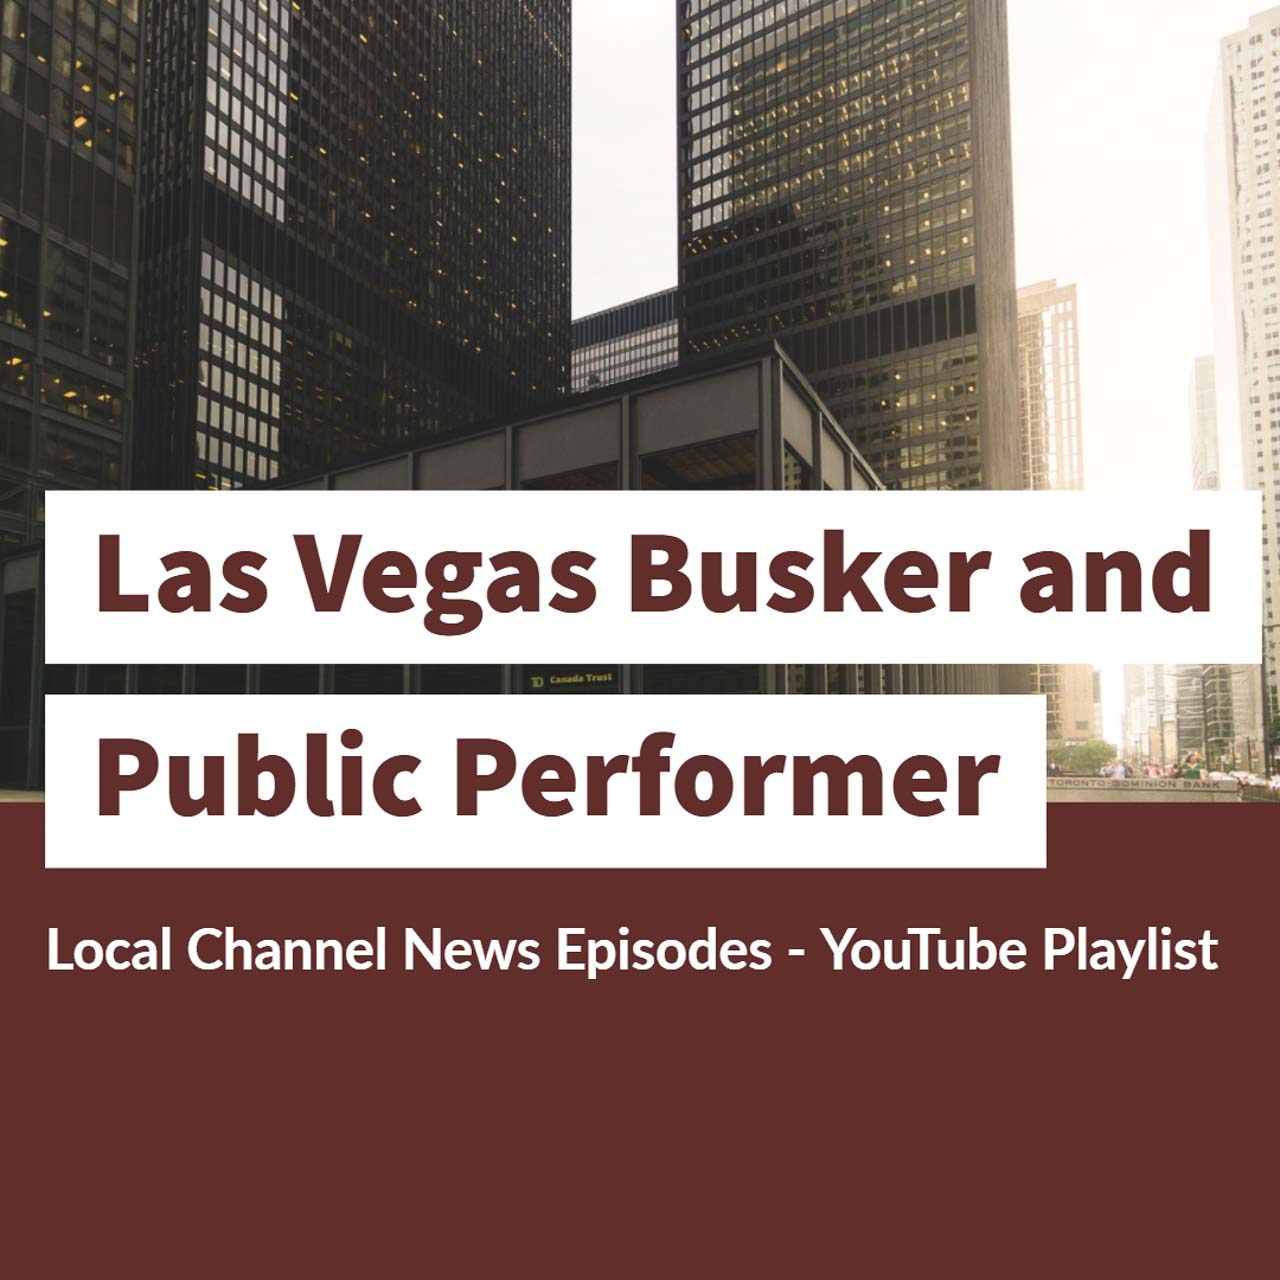 Las Vegas Busker and Public Performer - Local Channel News Episodes - Youtube Playlist